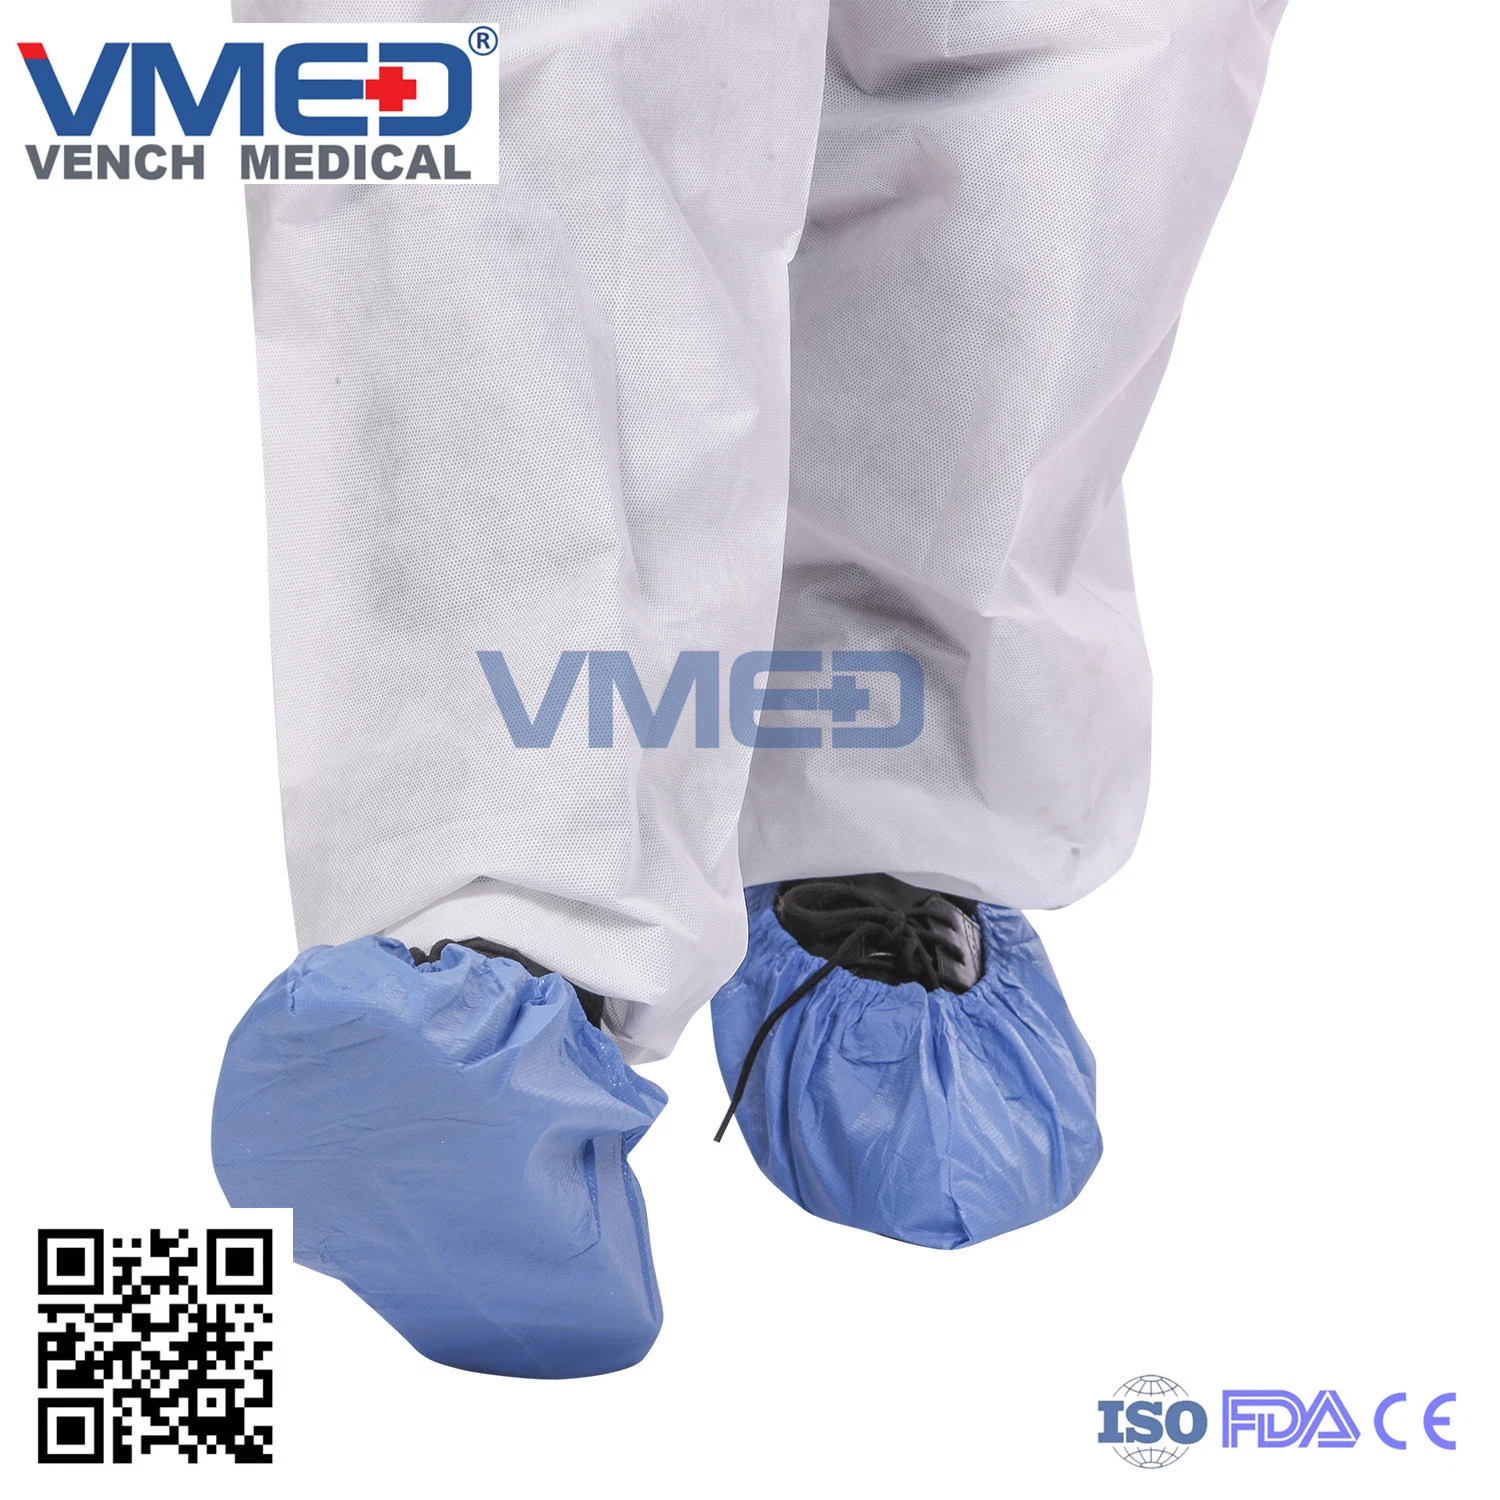 CPE Shoe Cover, Medical Hospital Industry CPE Disposable Overshoes, Disposable CPE Non-Woven Shoe Cover, Protective CPE Shoe Cover, Non-Wpven Shoe Cover